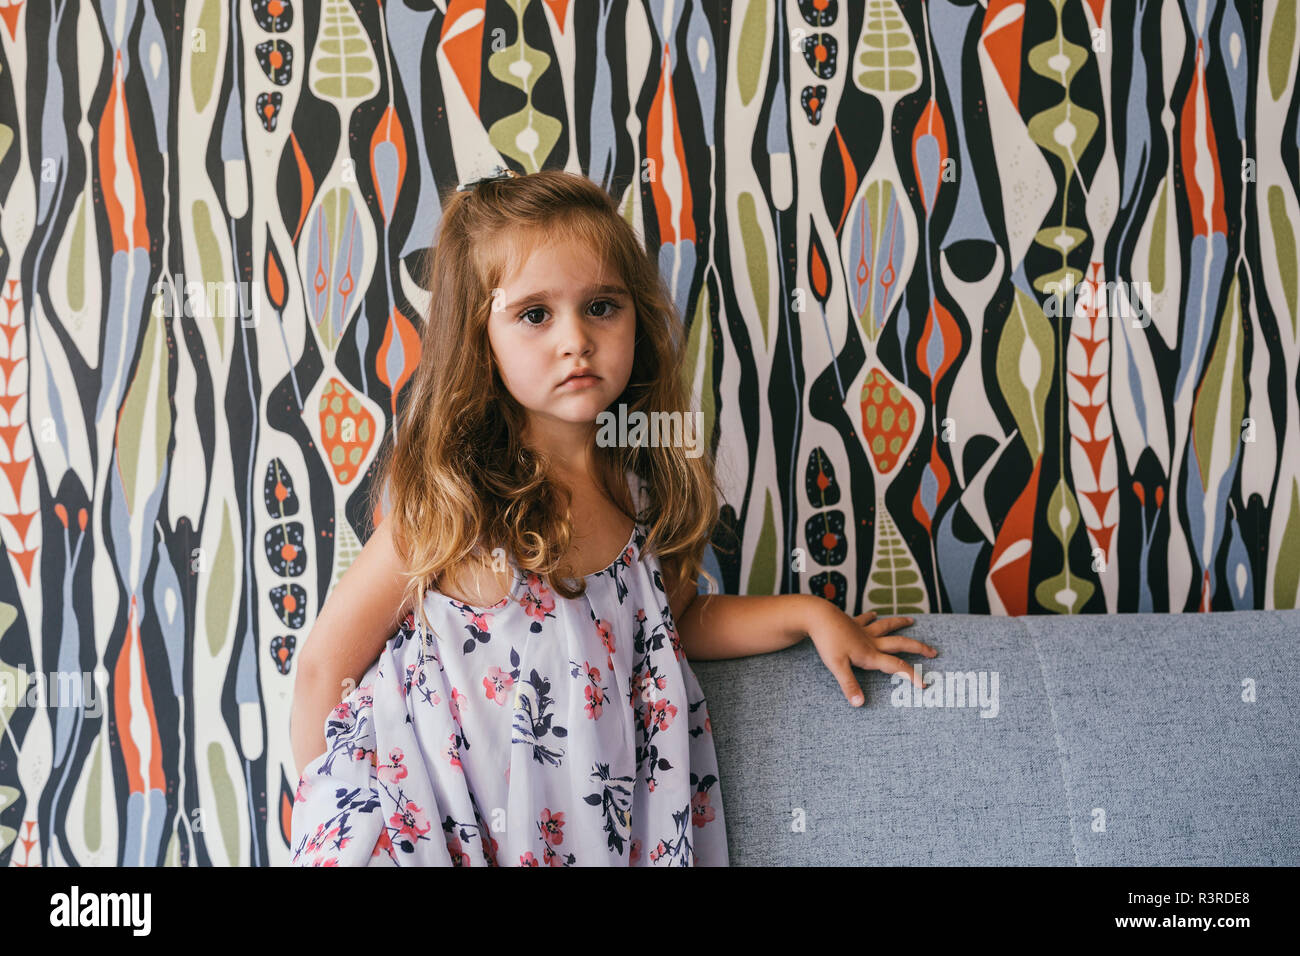 Portrait of serious little girl on couch in front of patterned wallpaper Stock Photo